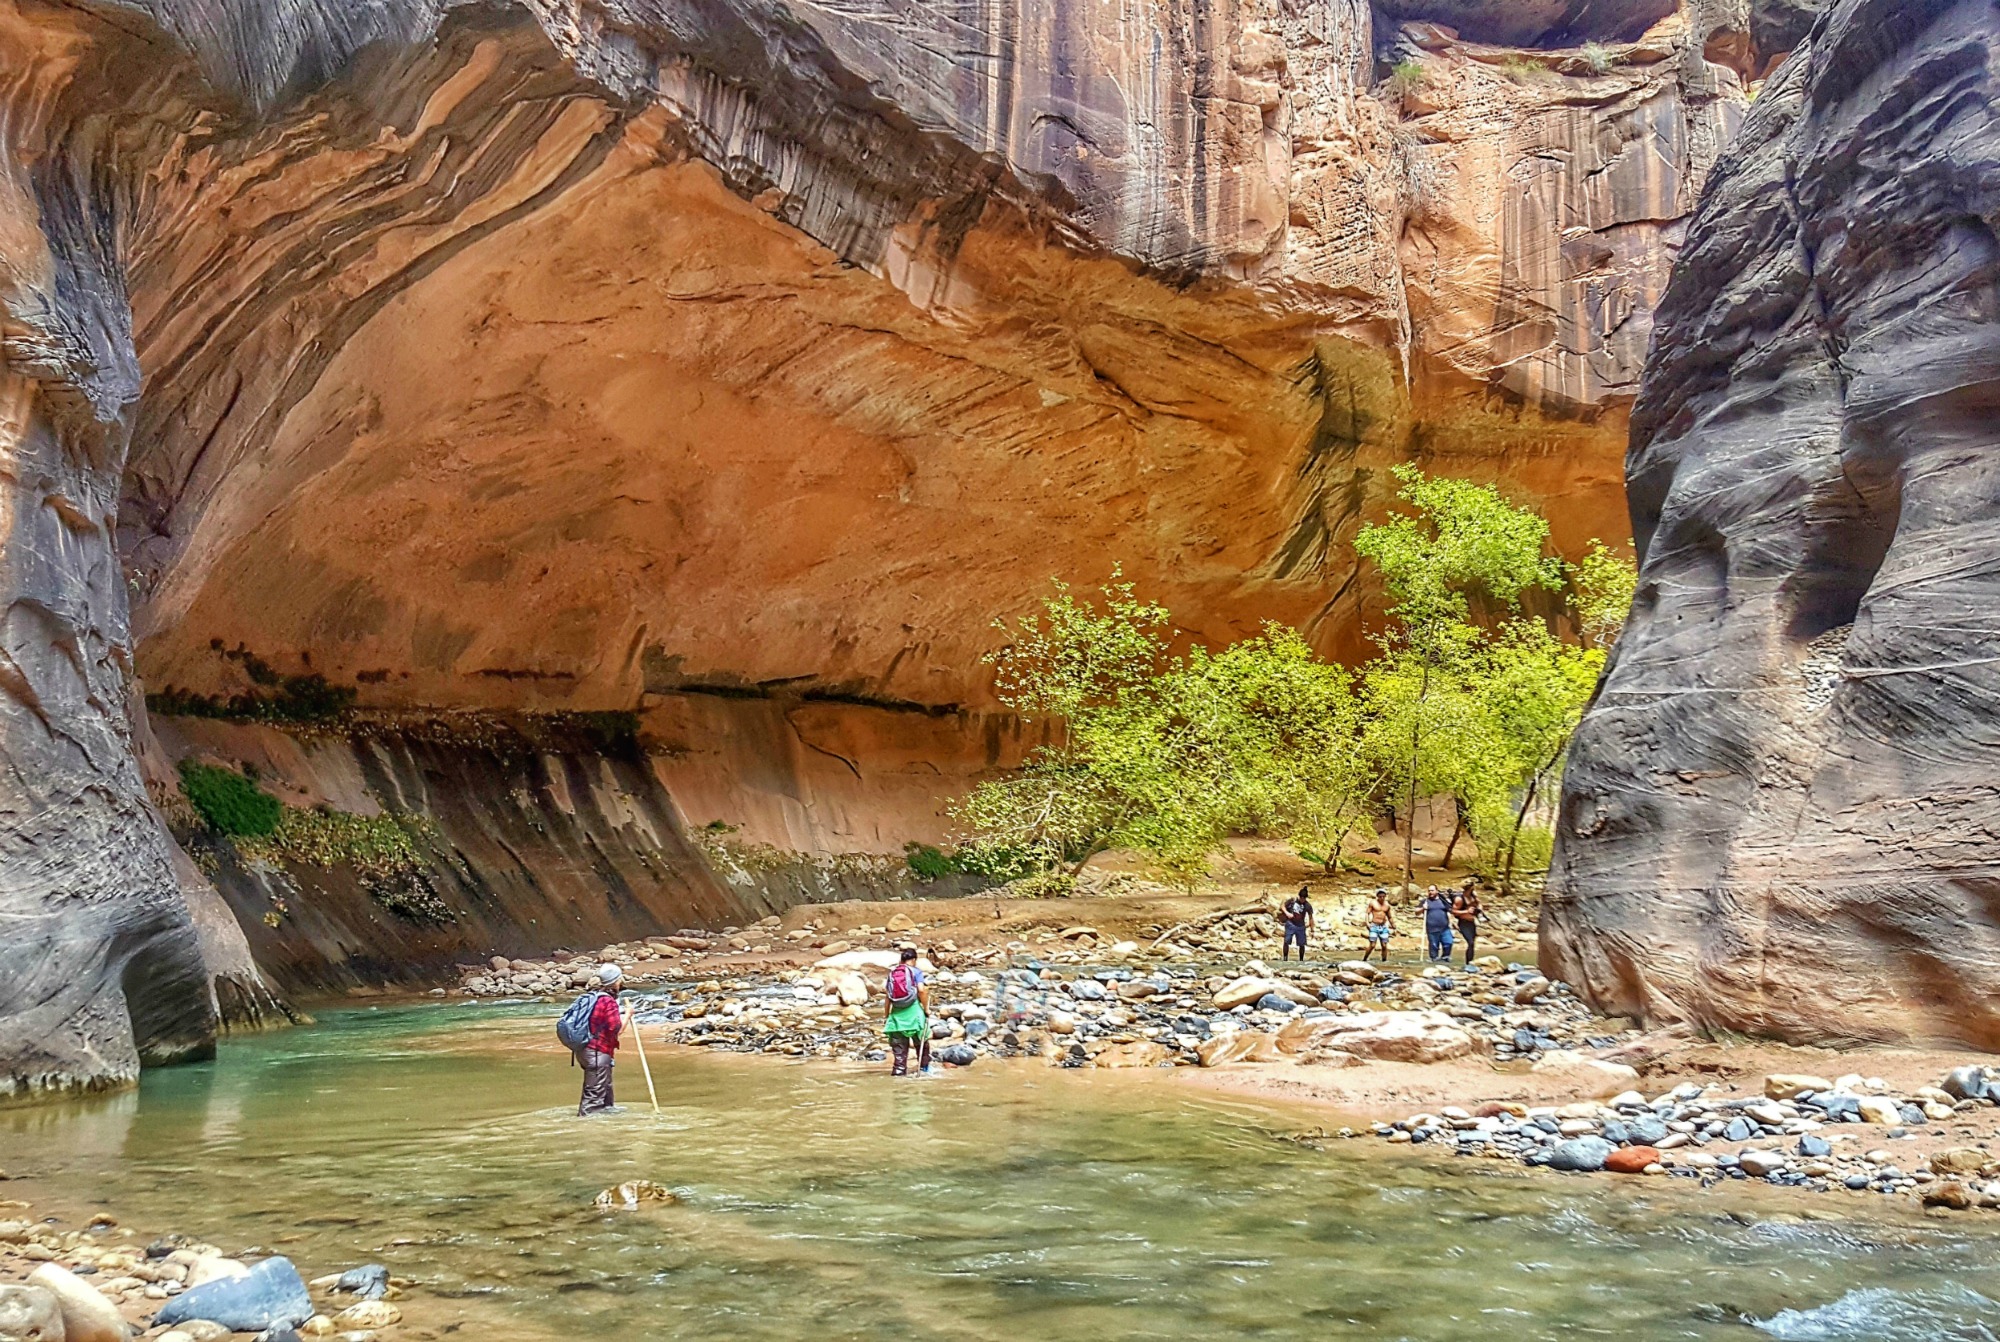 Hiking in the Strait of Zion.